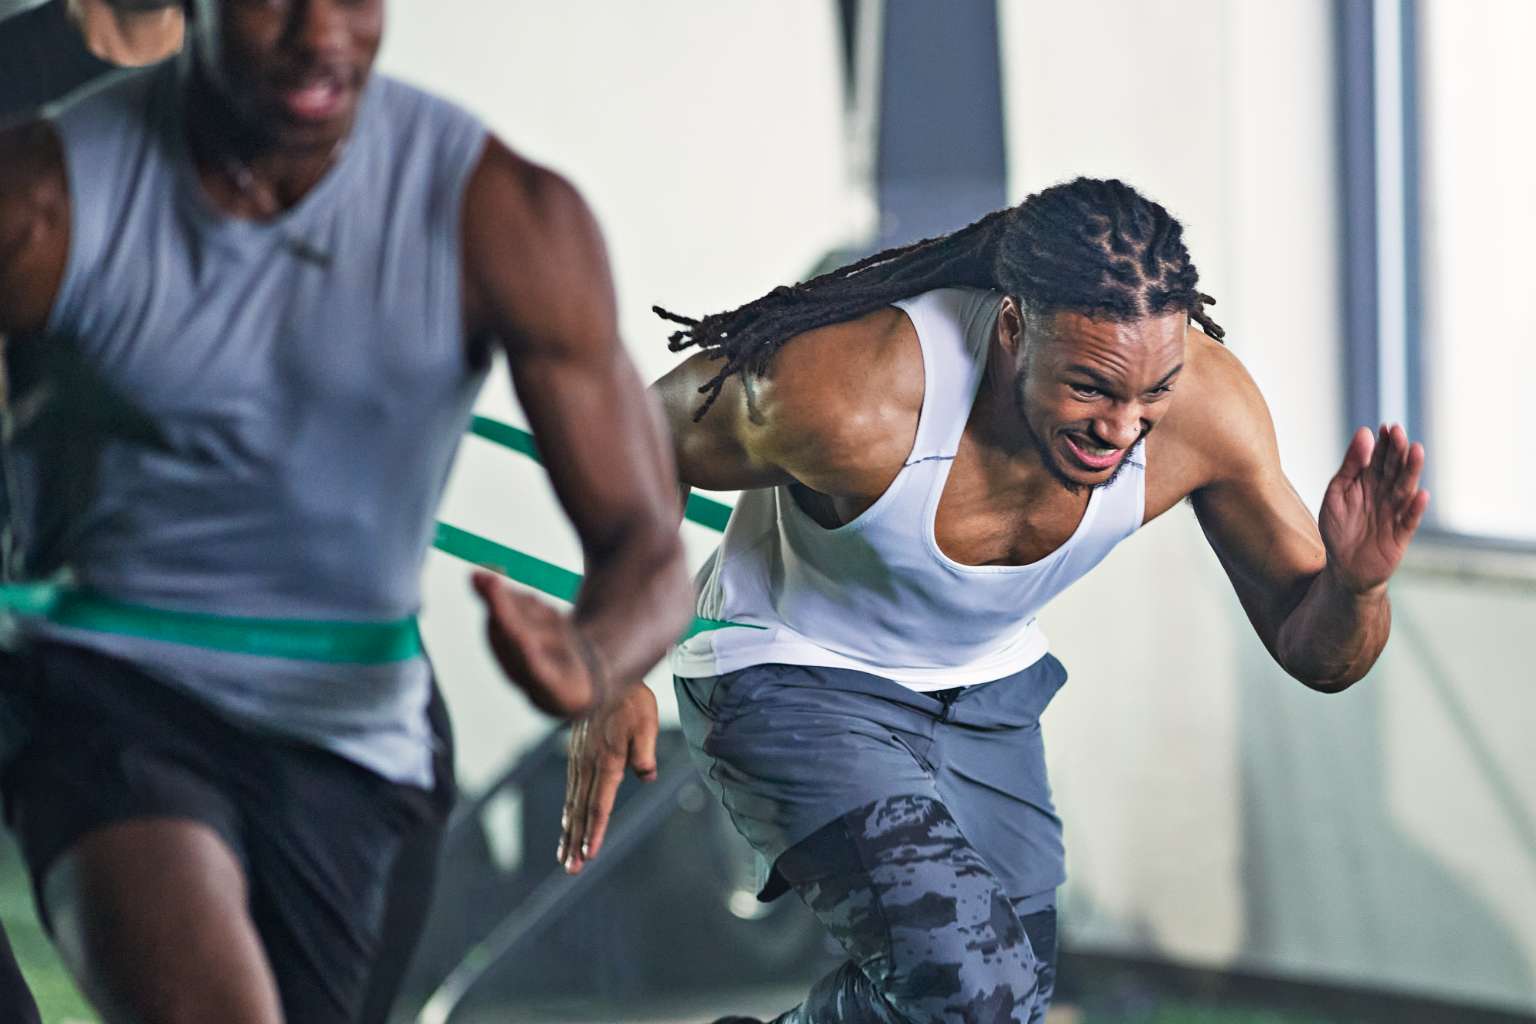 Man participating in a Gameface resistance drill on an indoor turf field.